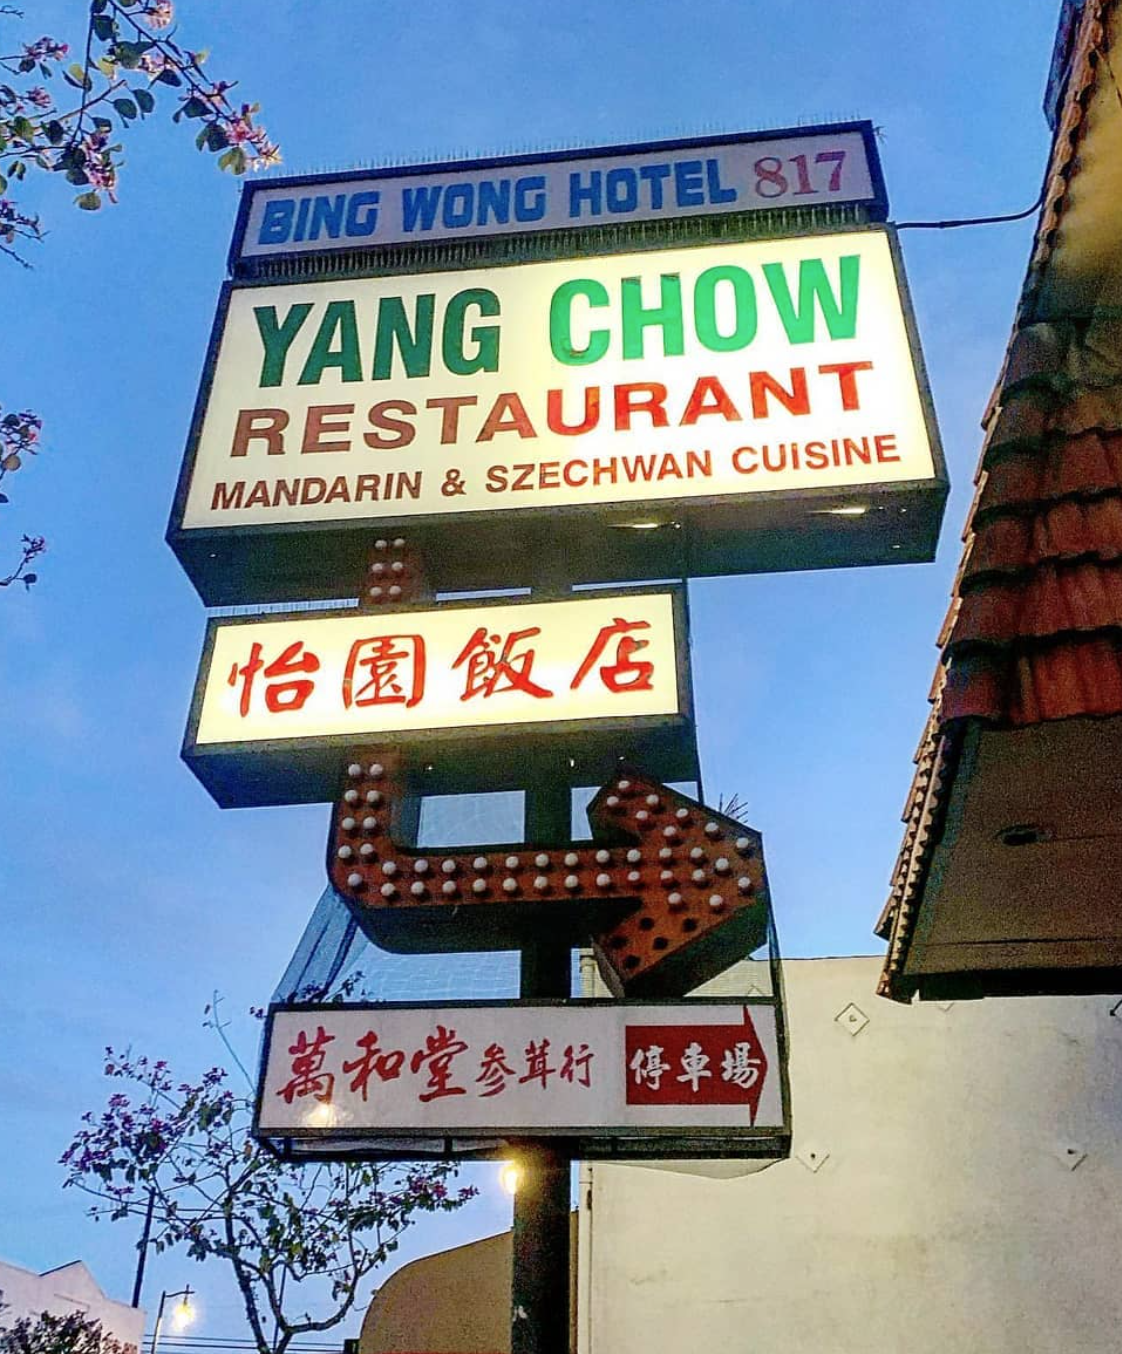 Yang chow restaurant chinatown los angeles 